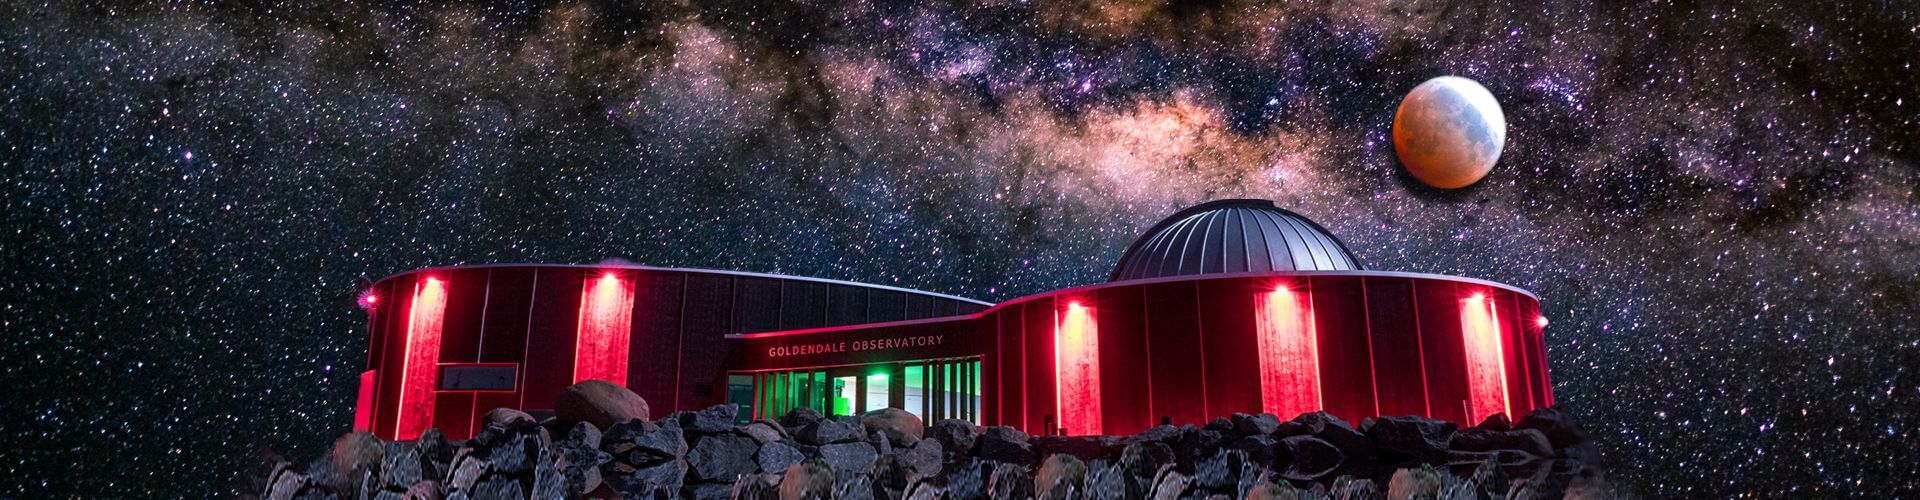 Goldendale Observatory milky way at night graphic